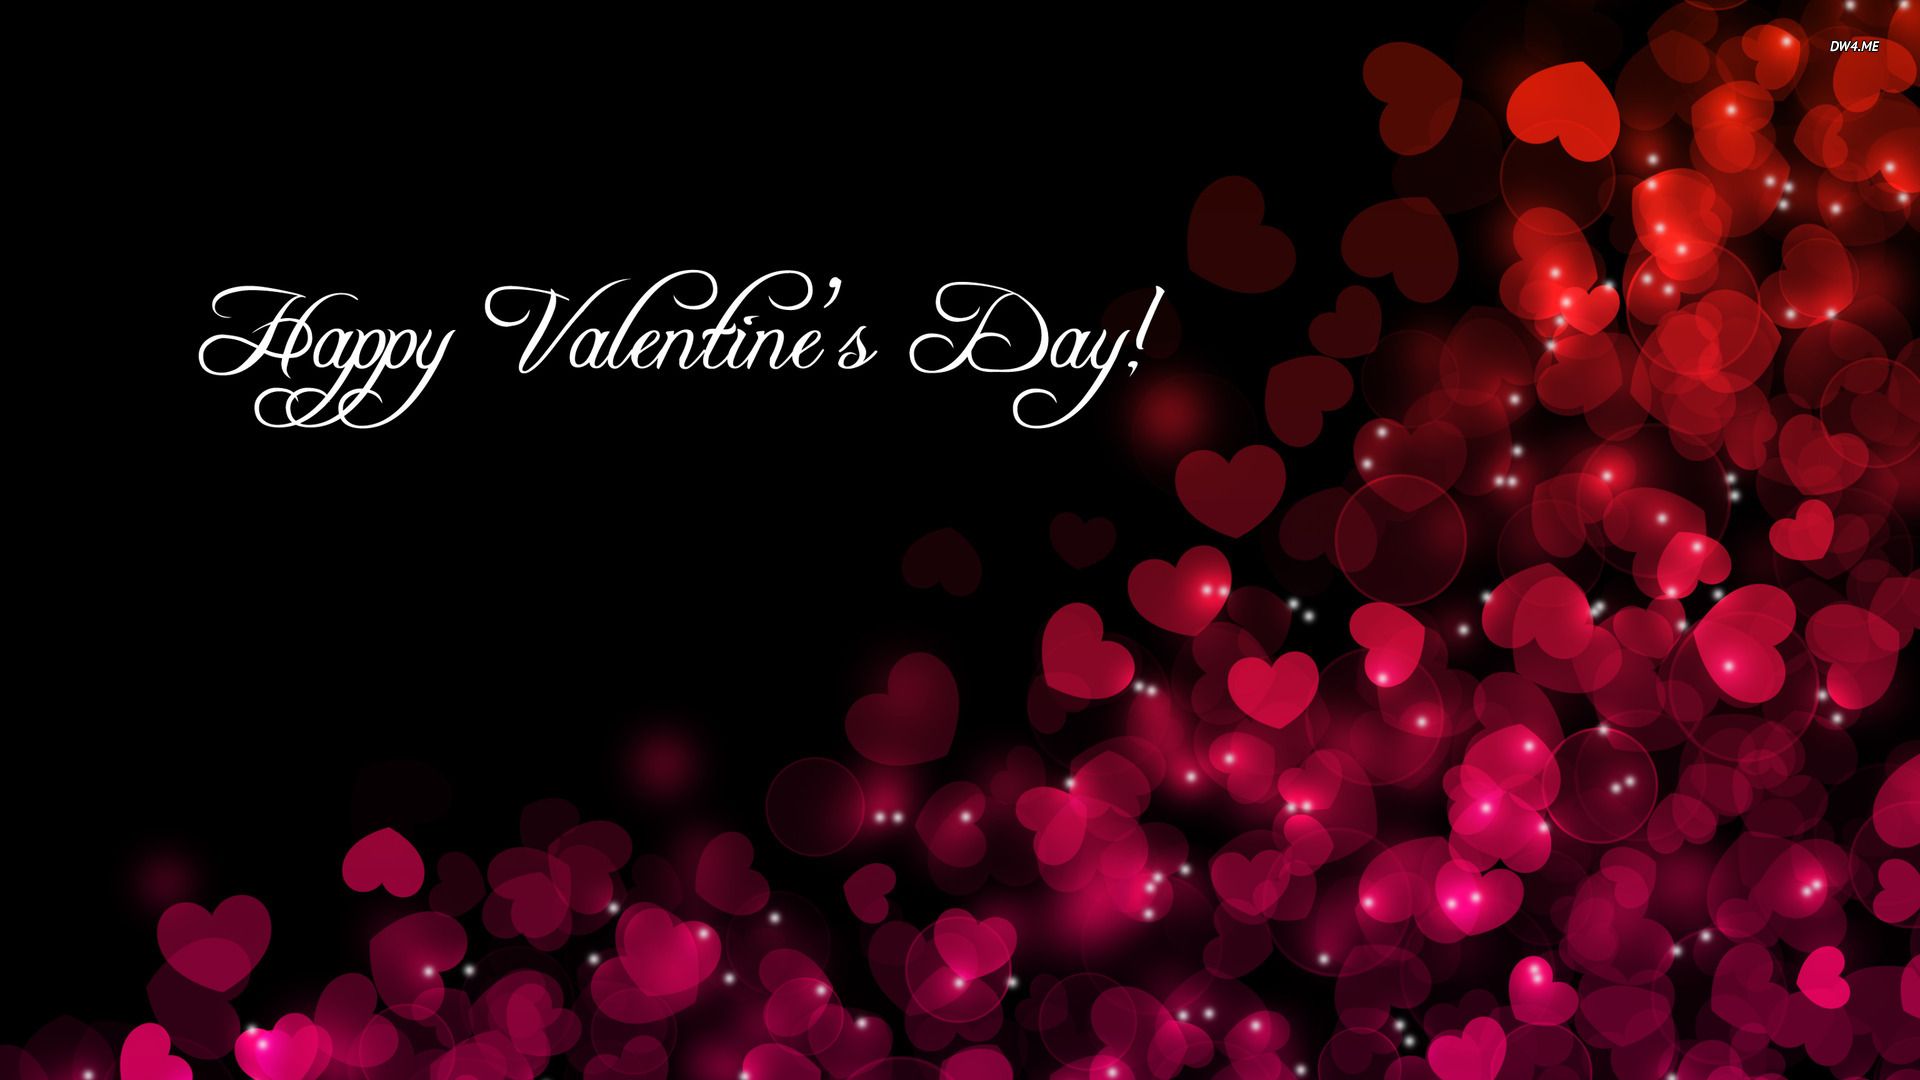 Valentines Day Wallpaper free downloadto5animations.com Wallpaper, Gifs, Background, Image